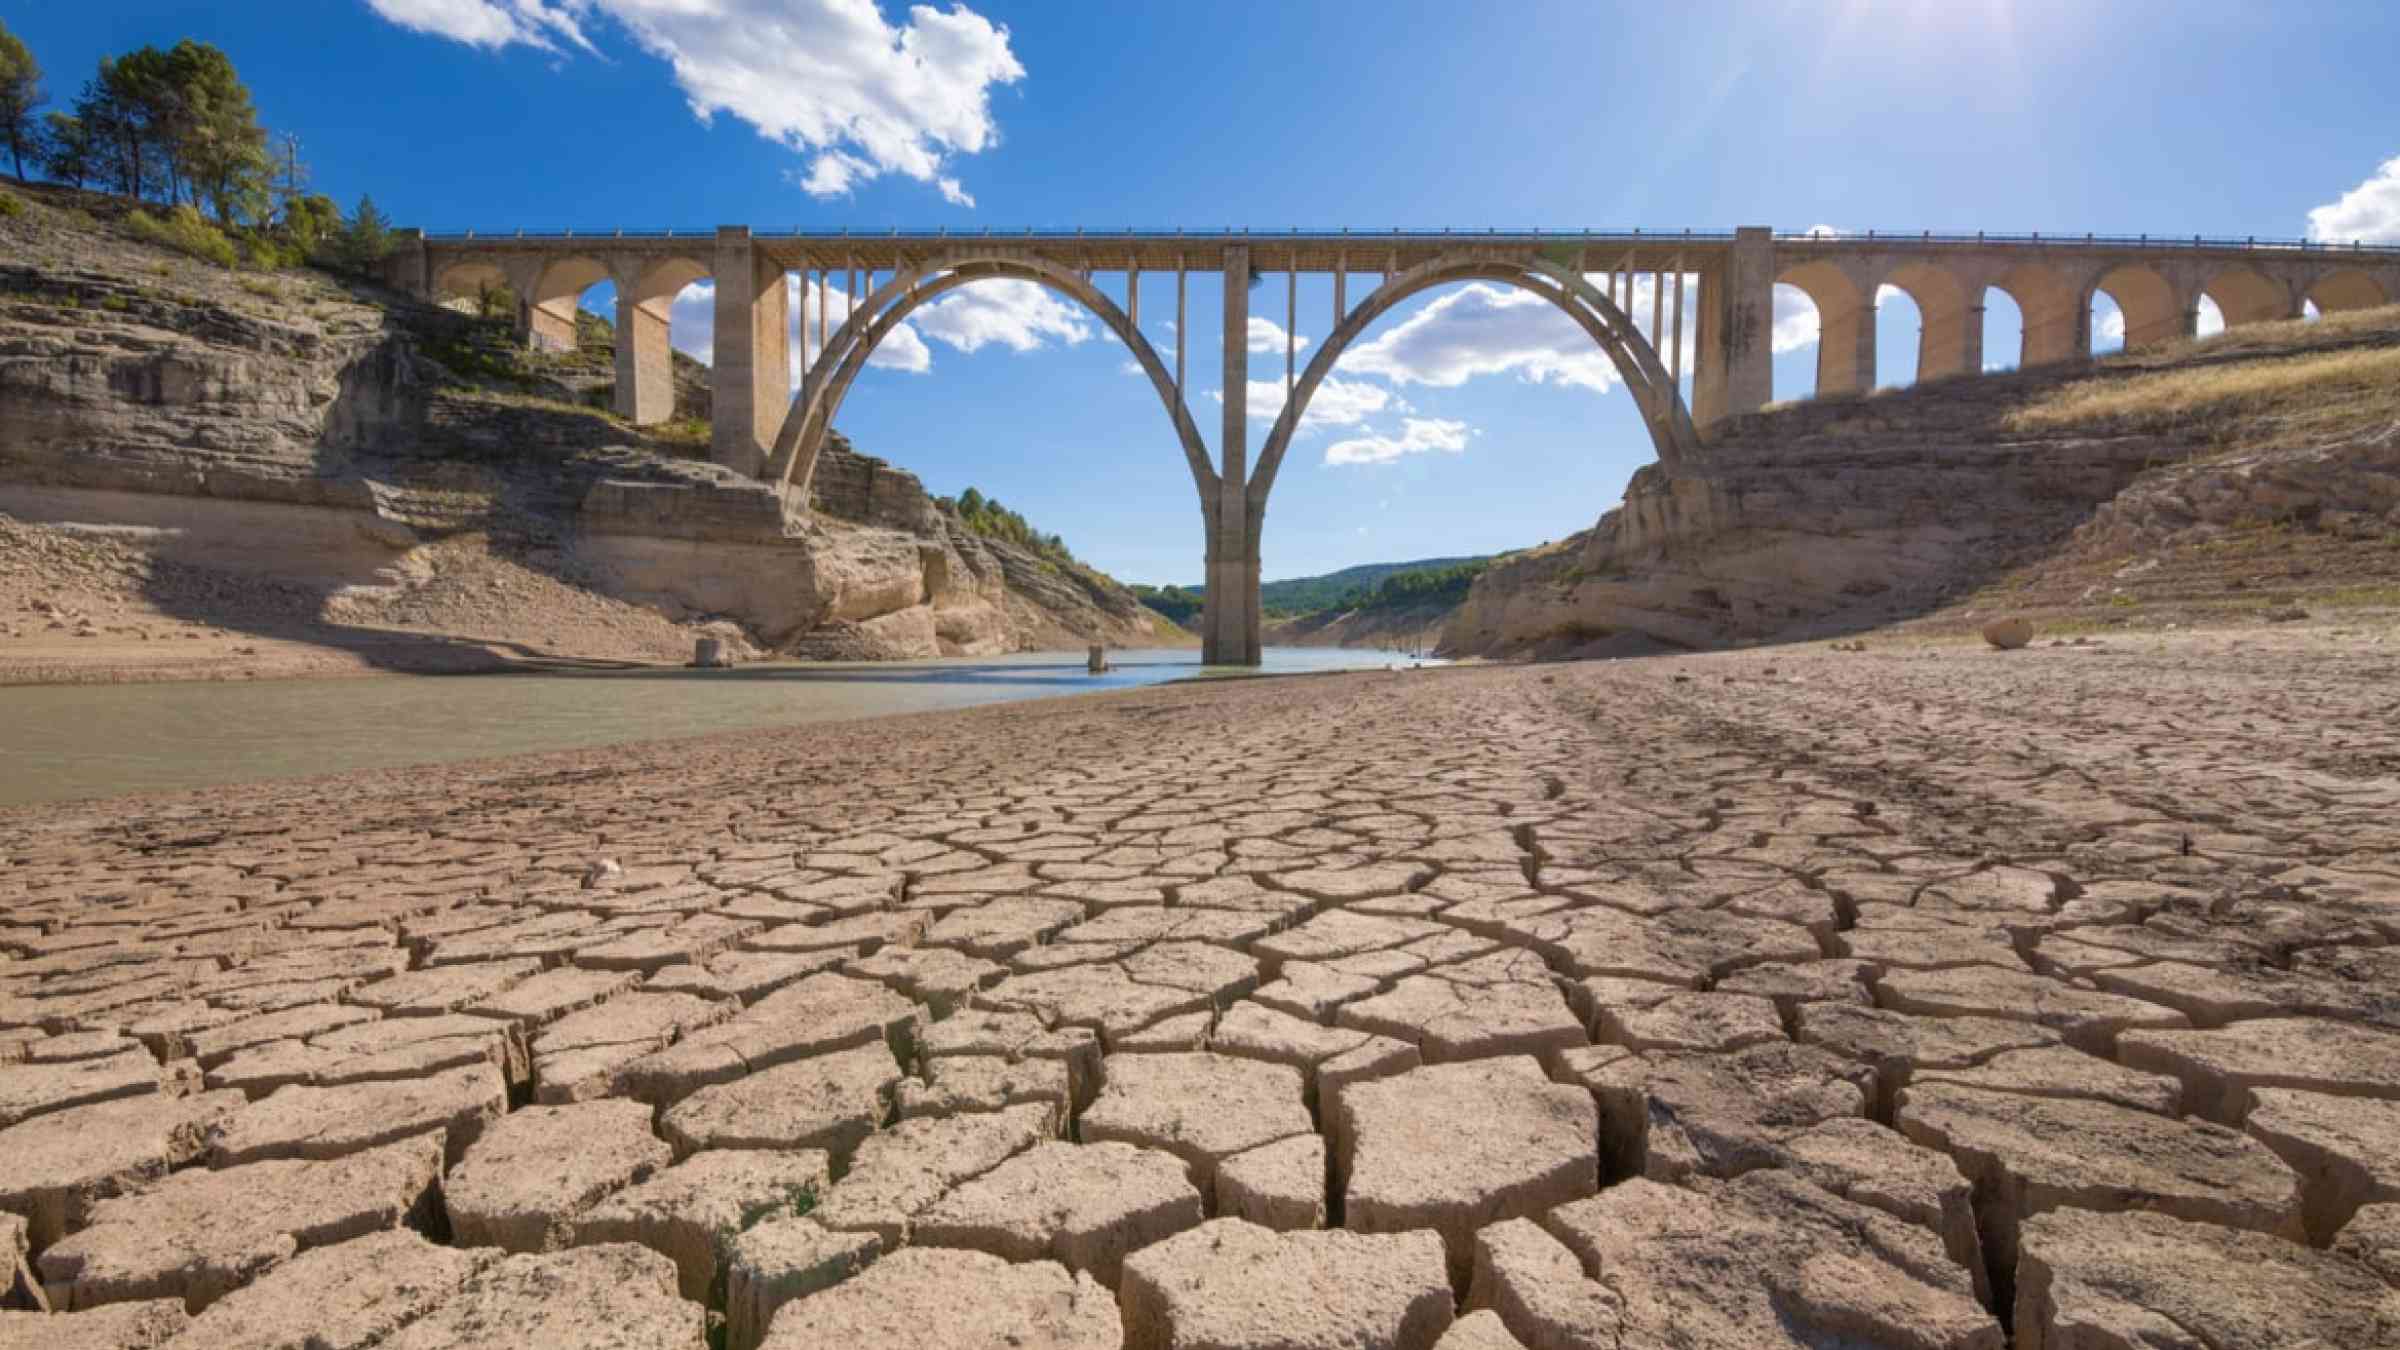 Europe drought: almost half of the EU +UK territory at risk | PreventionWeb